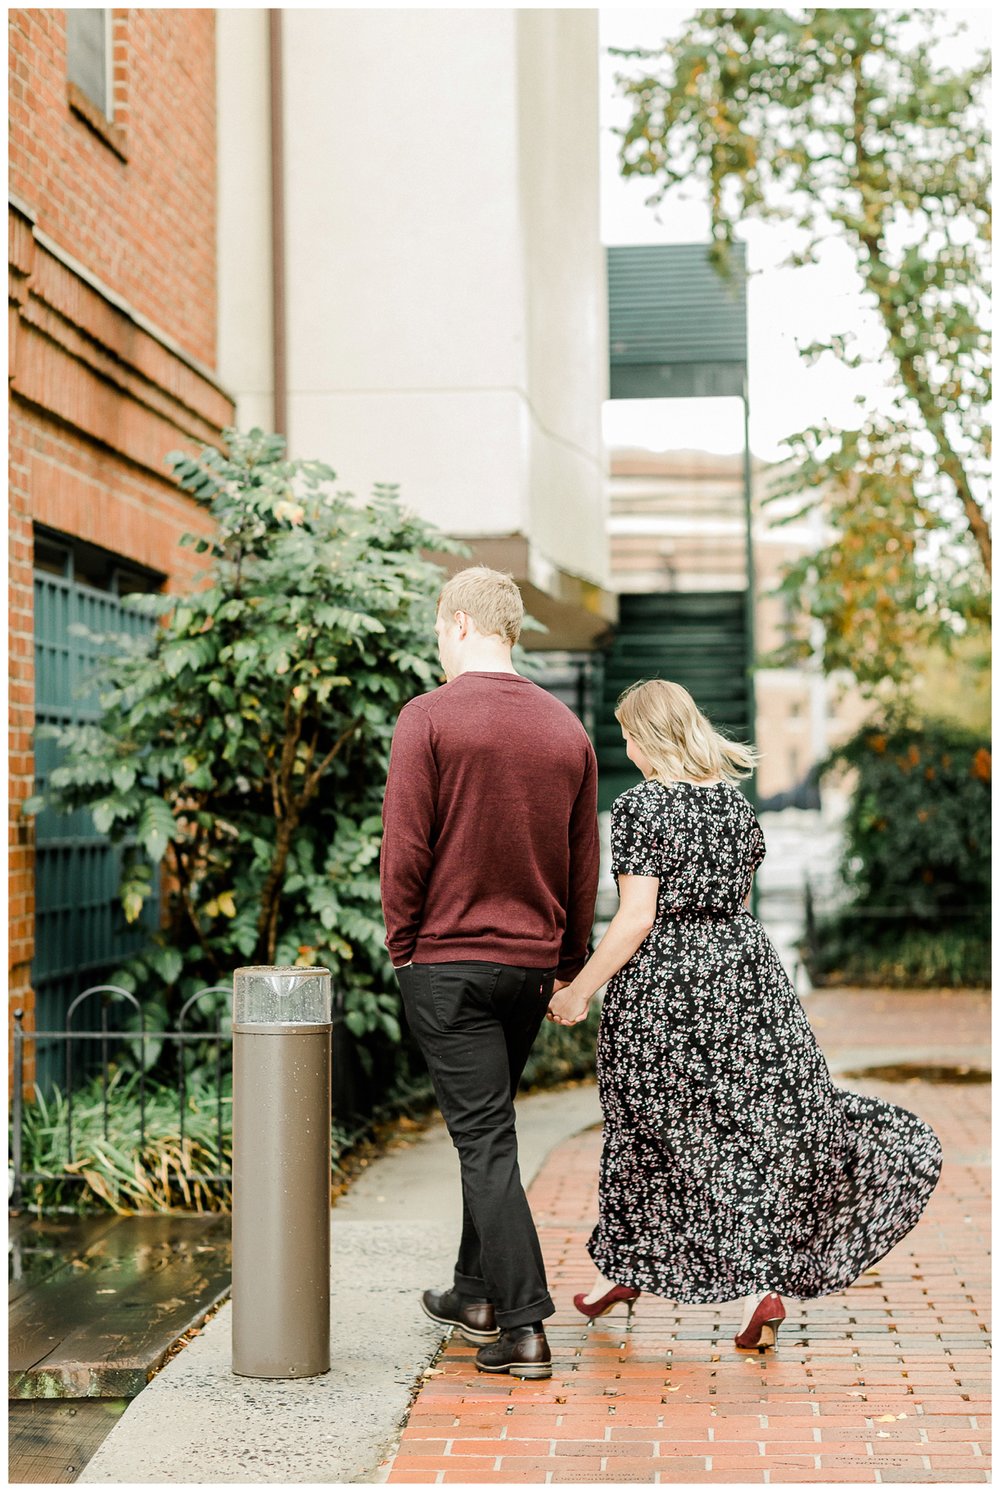 A romantic Fells Point engagement session in the rain.